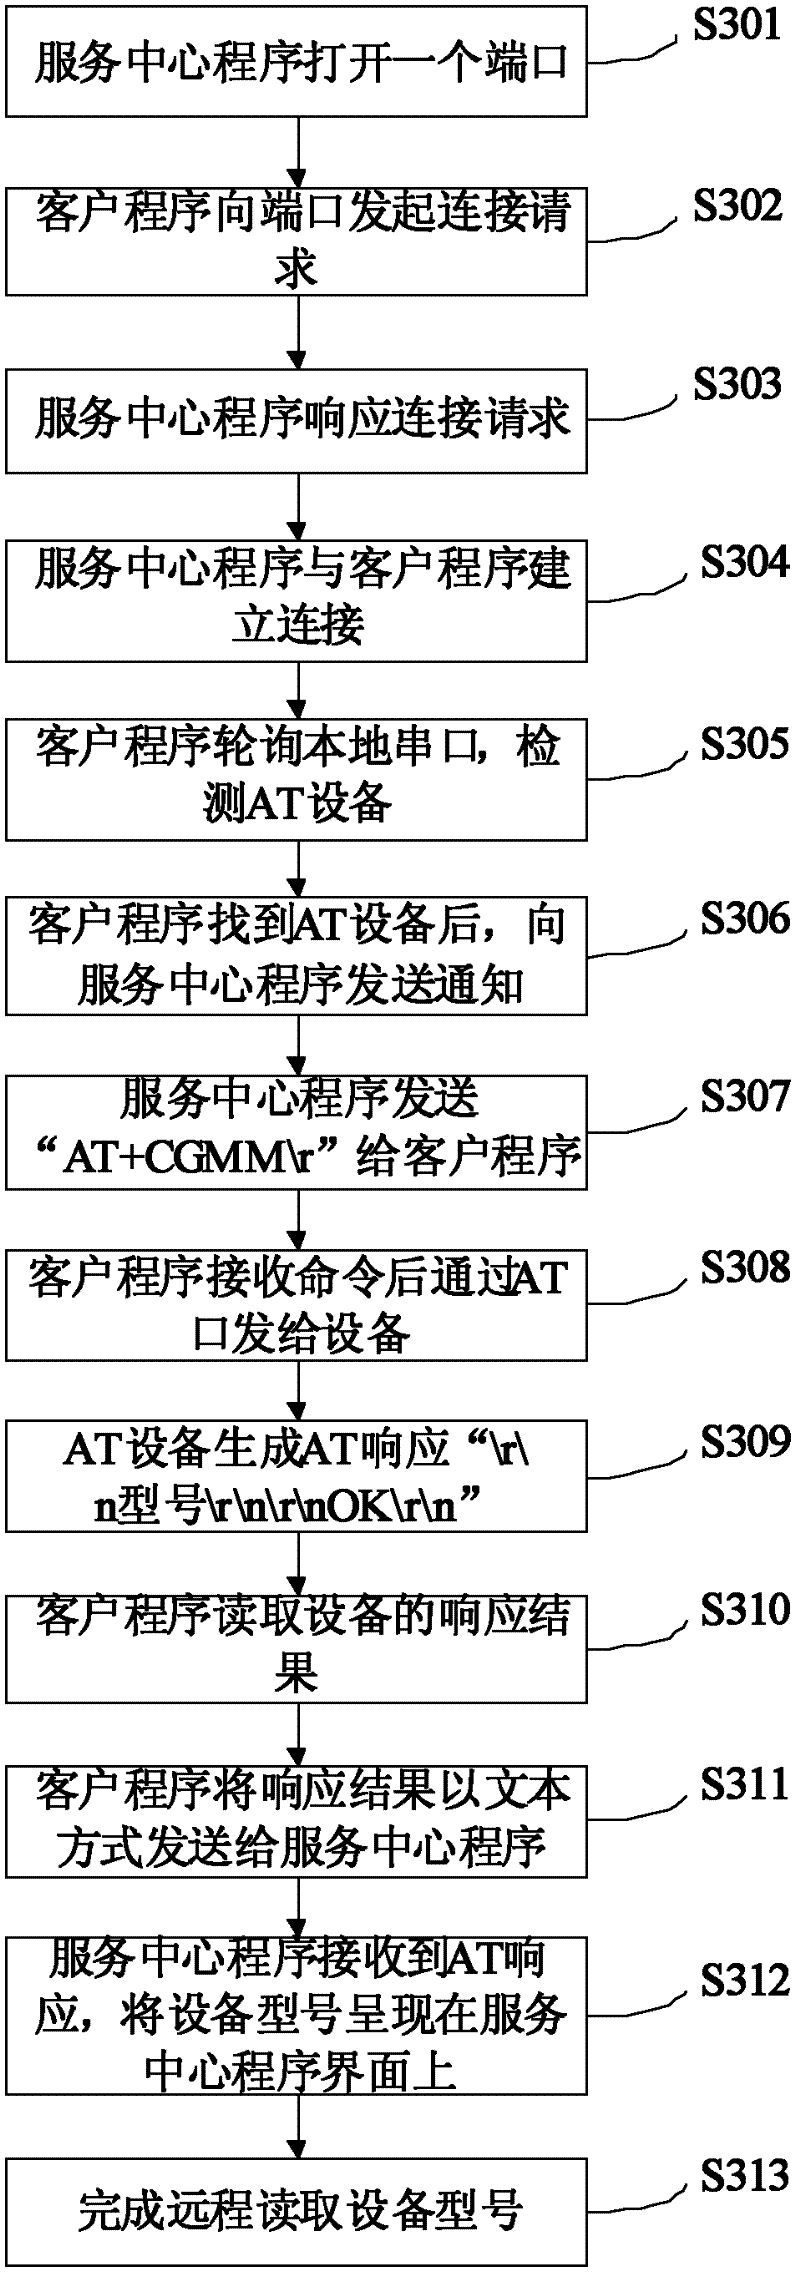 A device and method for remotely operating the device